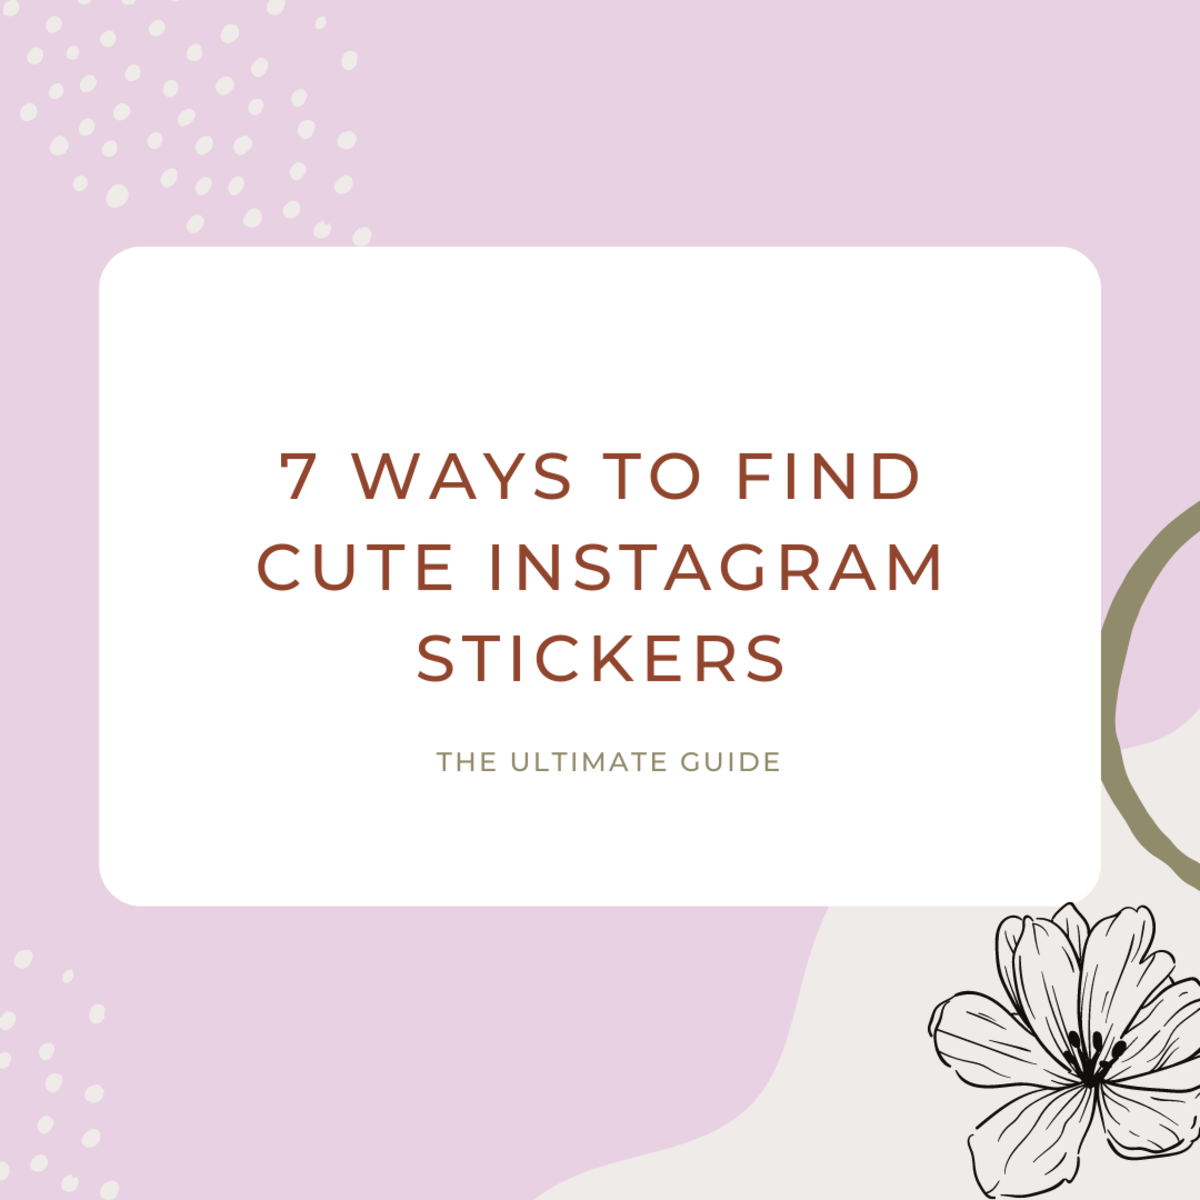 7 Ways to Find Cute Instagram Stickers: The Ultimate List